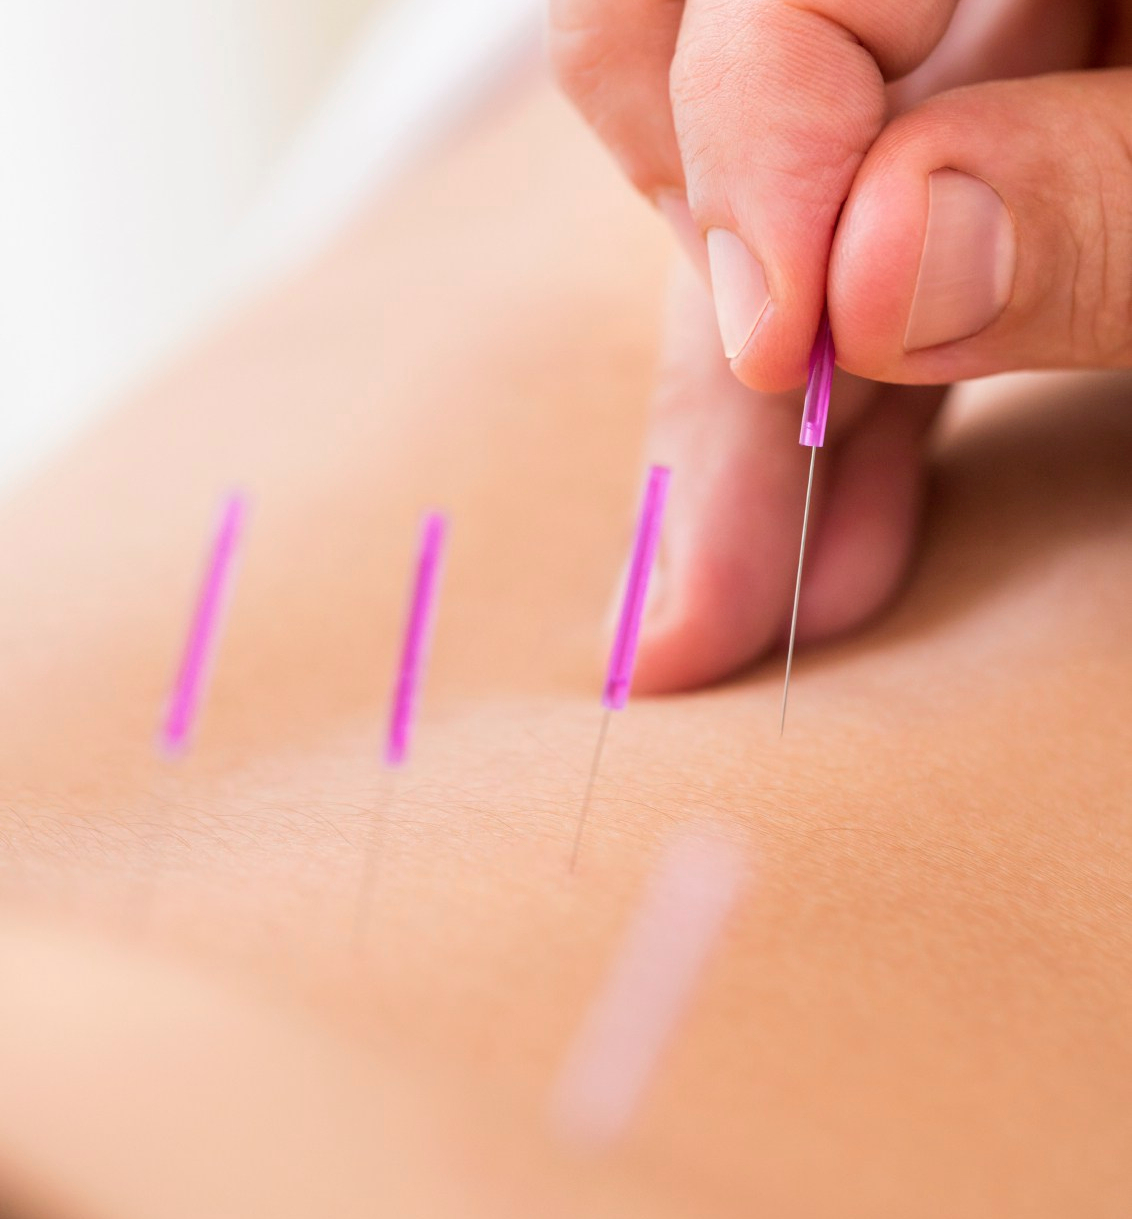 Dry needling: An innovative tool in treating pelvic-related conditions